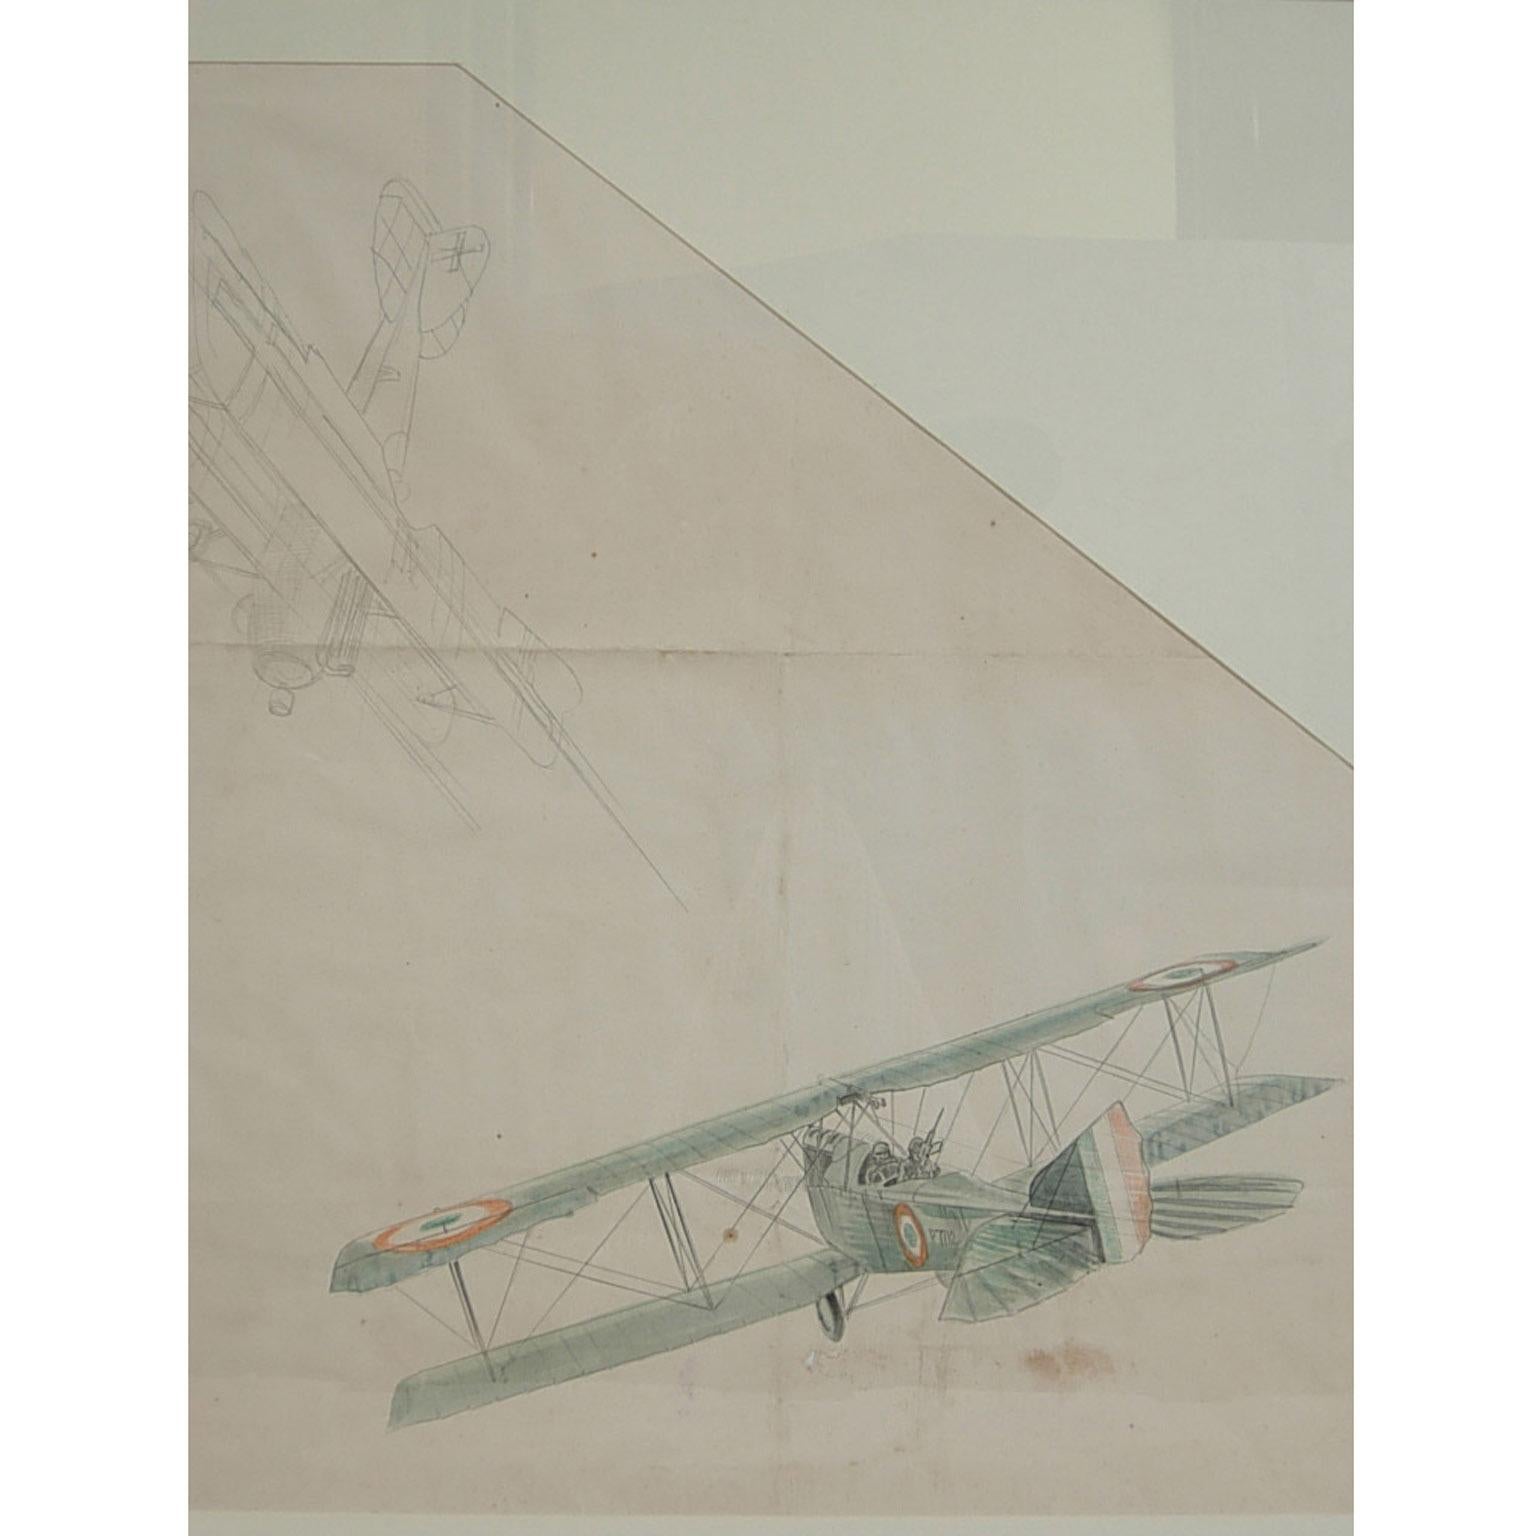 Water-color and pencil drawing representing two biplanes drawn by Riccardo Cavigioli. Left = single-seat biplane fighter Albatros D III produced in 1917. Right= two-seat single-engined biplane for reconnaissance Fiat R 2, produced in 1918 on the